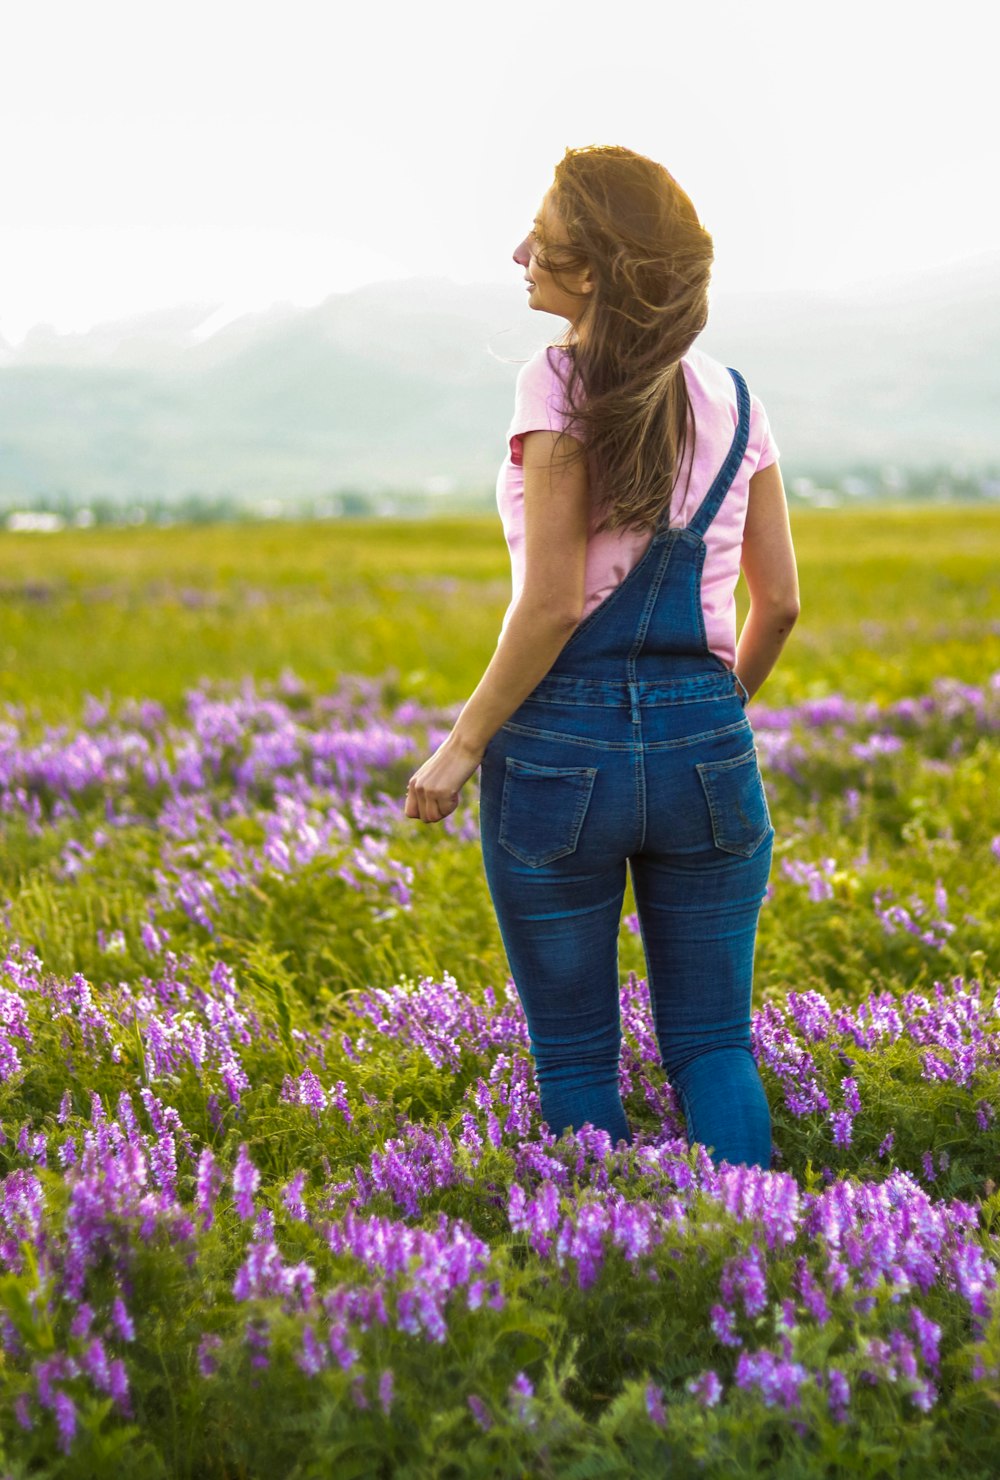 woman in white tank top and blue denim jeans standing on purple flower field during daytime